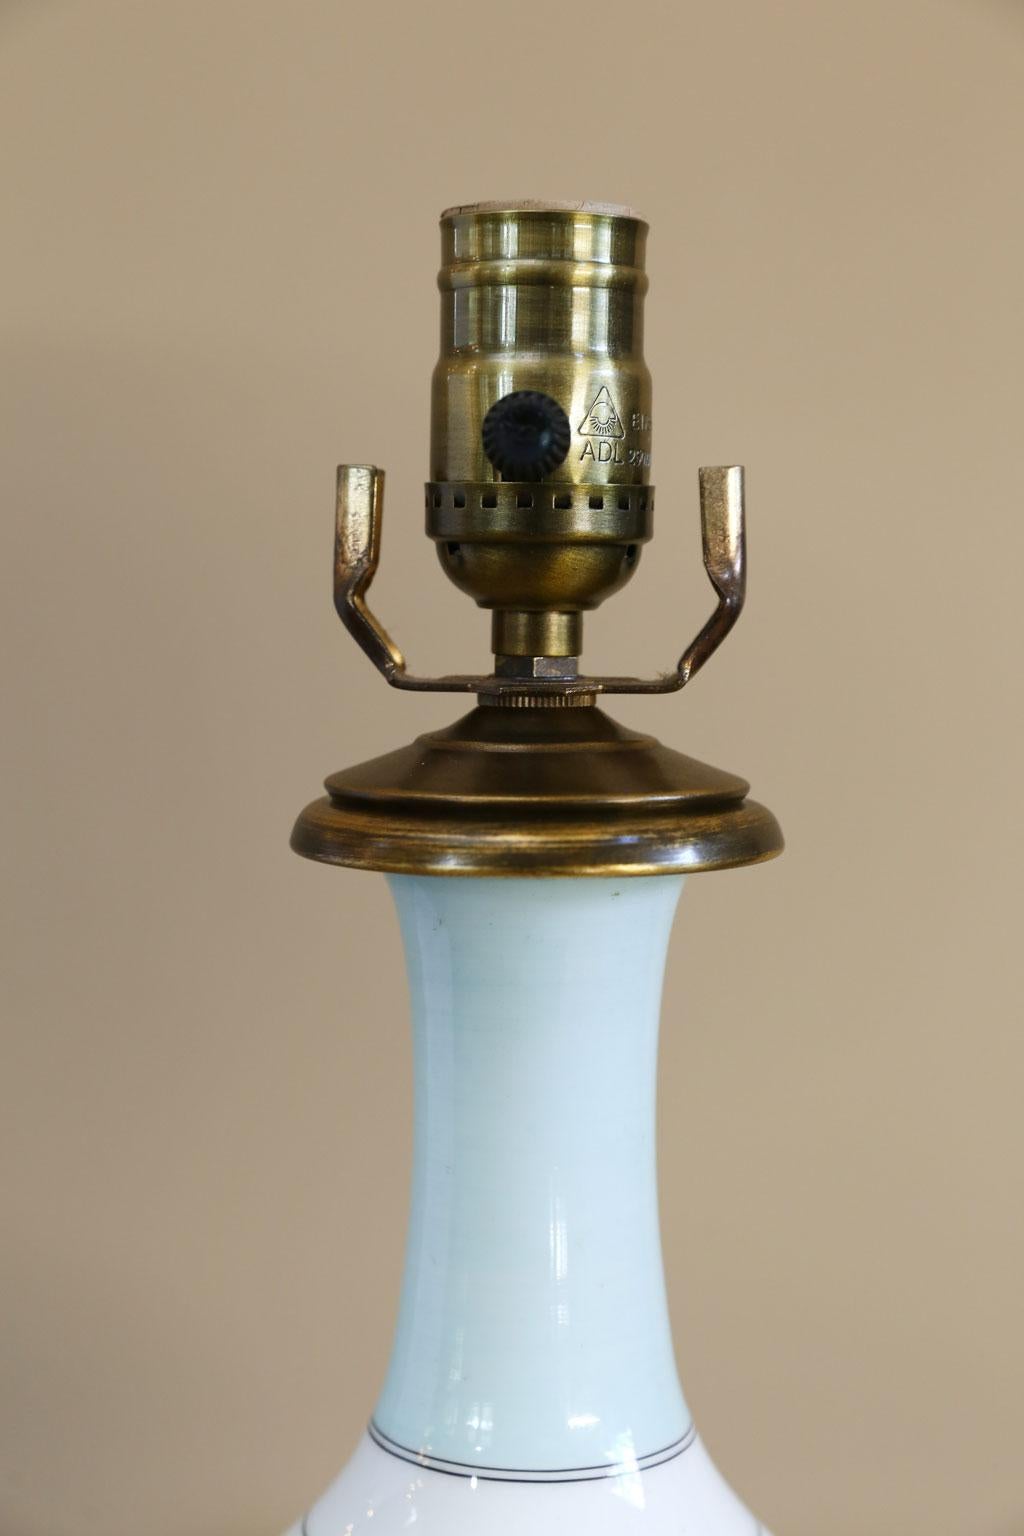 American Charming, Small Porcelain Table Lamp with Classic Greel Key Design